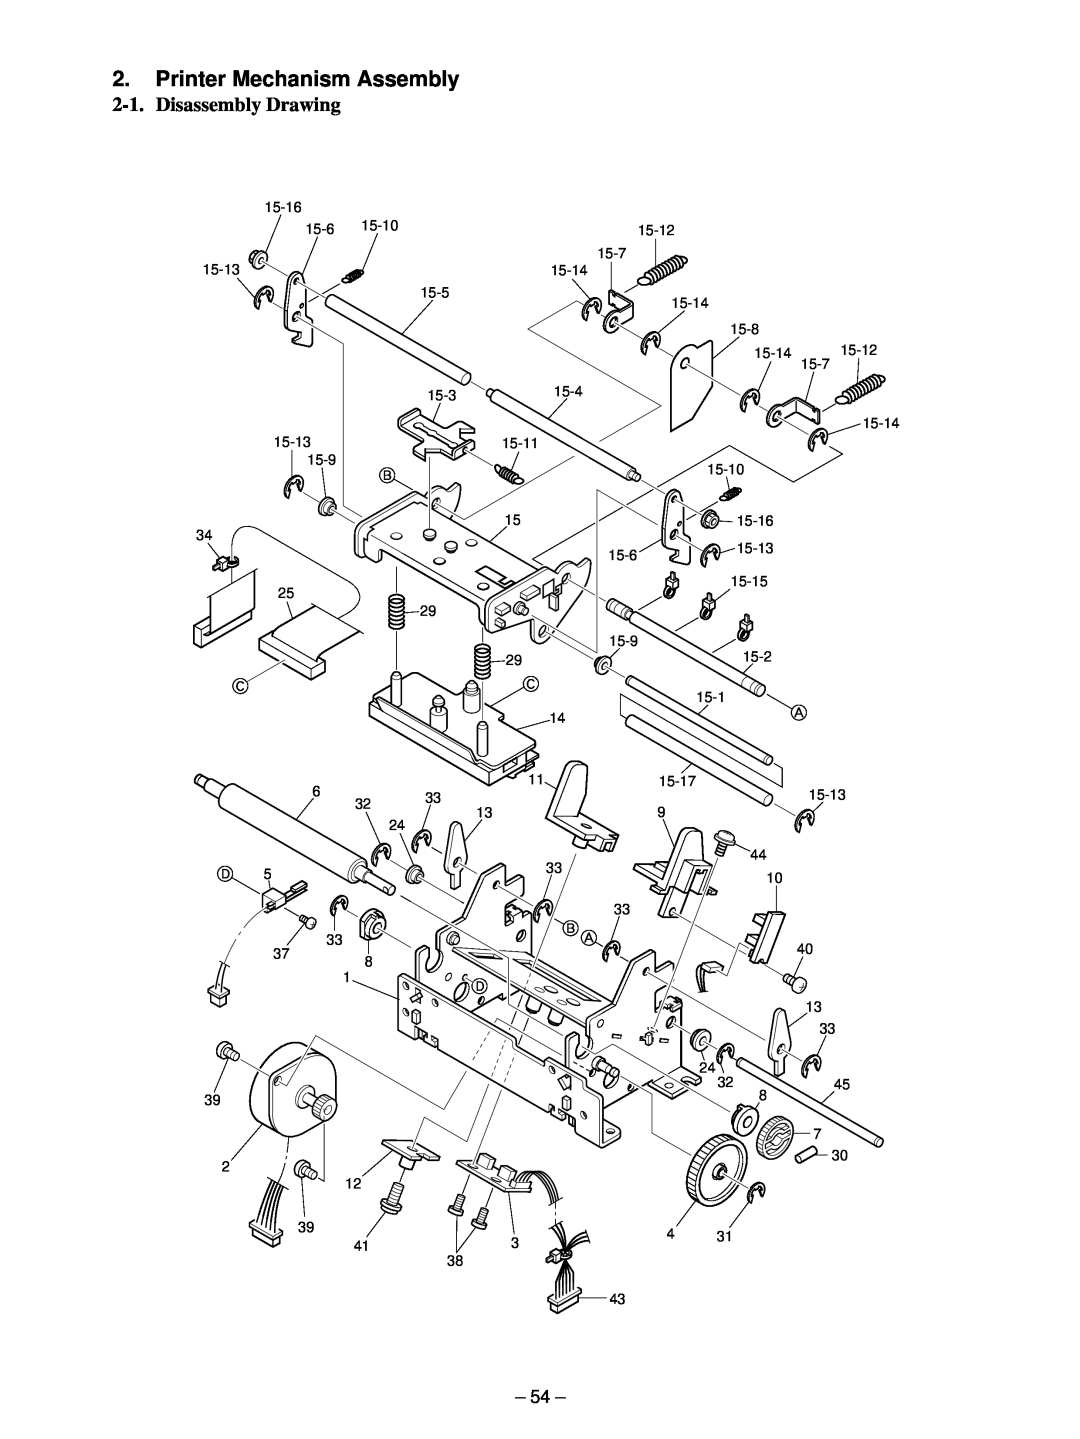 Star Micronics TSP400 technical manual Printer Mechanism Assembly, Disassembly Drawing 